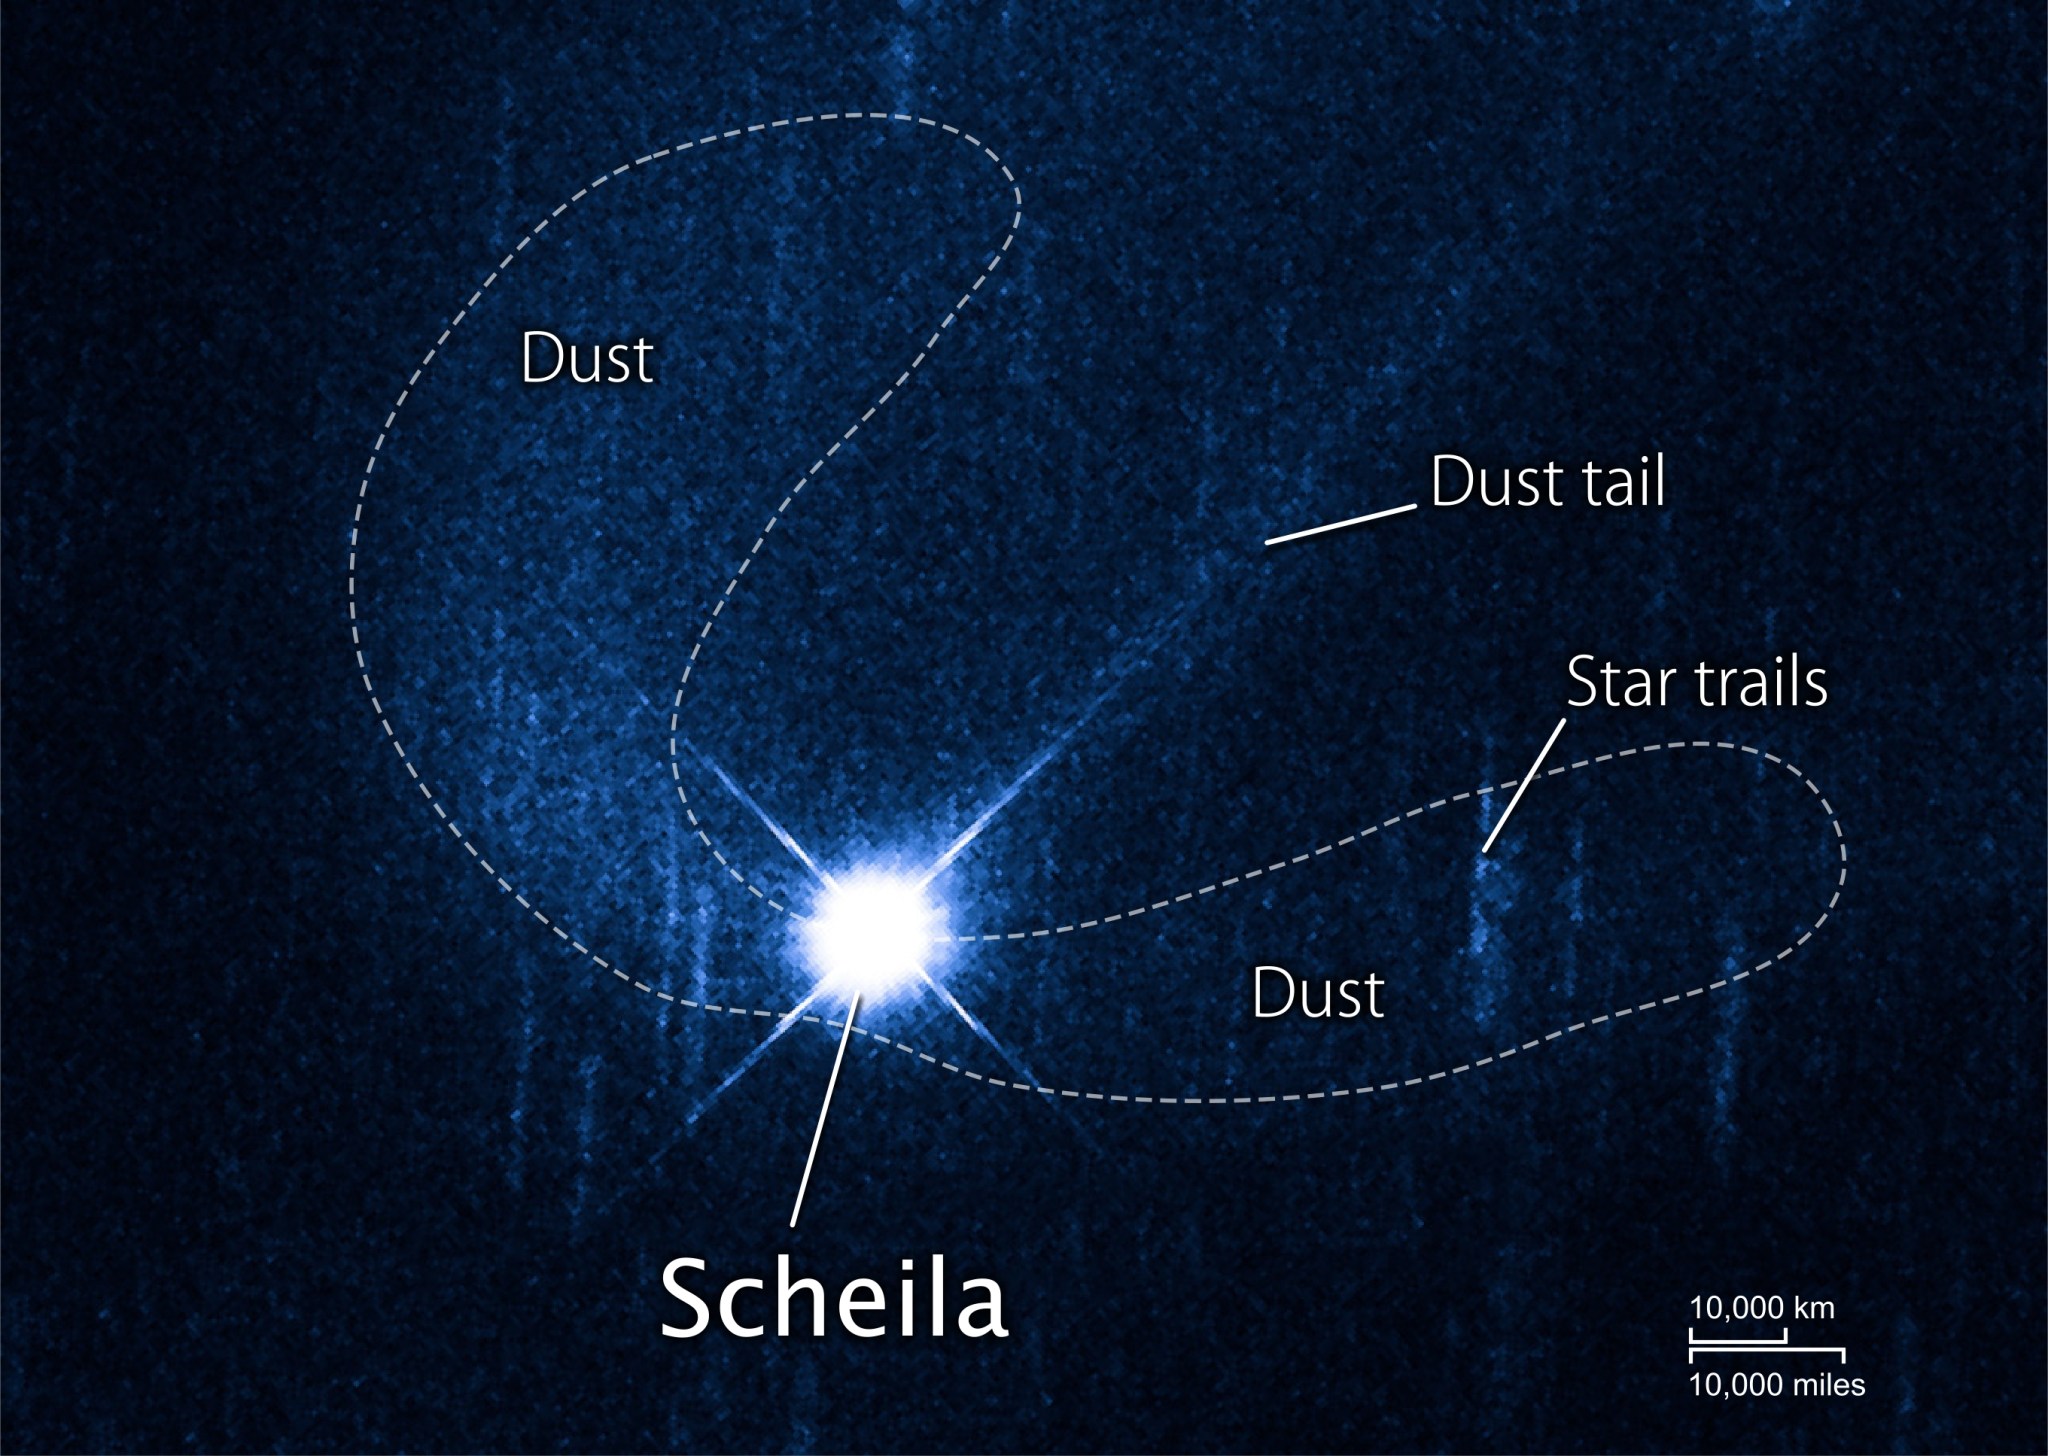 Asteroid Scheila showing dust plumes from a suspected impact